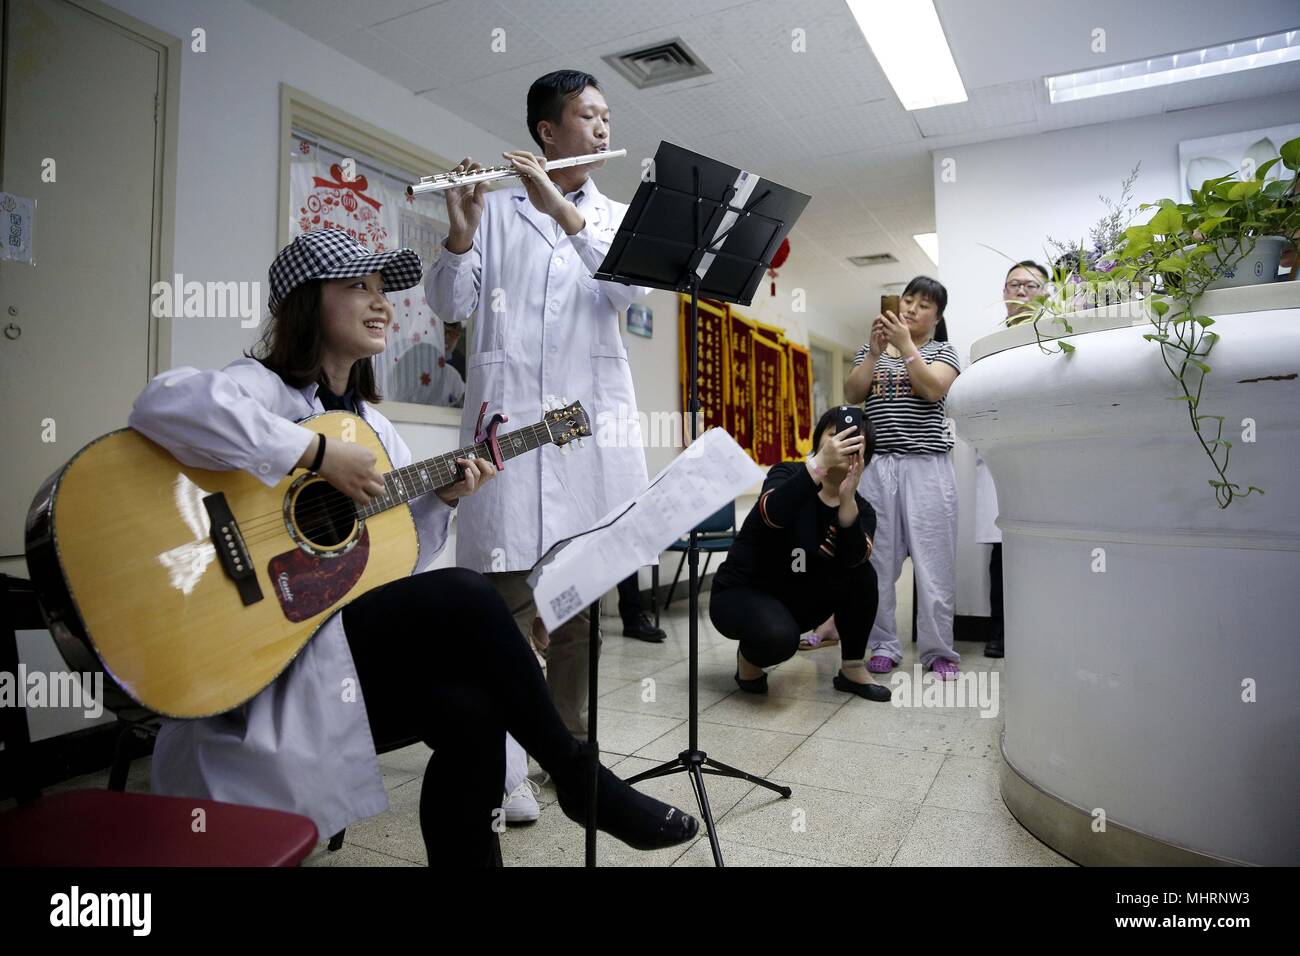 (180503) -- BEIJING, May 3, 2018 (Xinhua) -  Members of the 'Xieyun' orchestra perform in a ward of Peking Union Medical College Hospital (PUMCH) in Beijing, capital of China, April 23, 2018. In 2015, PUMCH doctors and Peking Union Medical College students launched the 'Xieyun' orchestra. Every month, members of 'Xieyun' would voluntarily stage one or two musical performances for patients, their families, and other medical workers. The orchestra was widely appreciated by its audiences for its performances and the members' concern and love for the patients. (Xinhua/Zhang Yuwei) (lb) (zt) Stock Photo